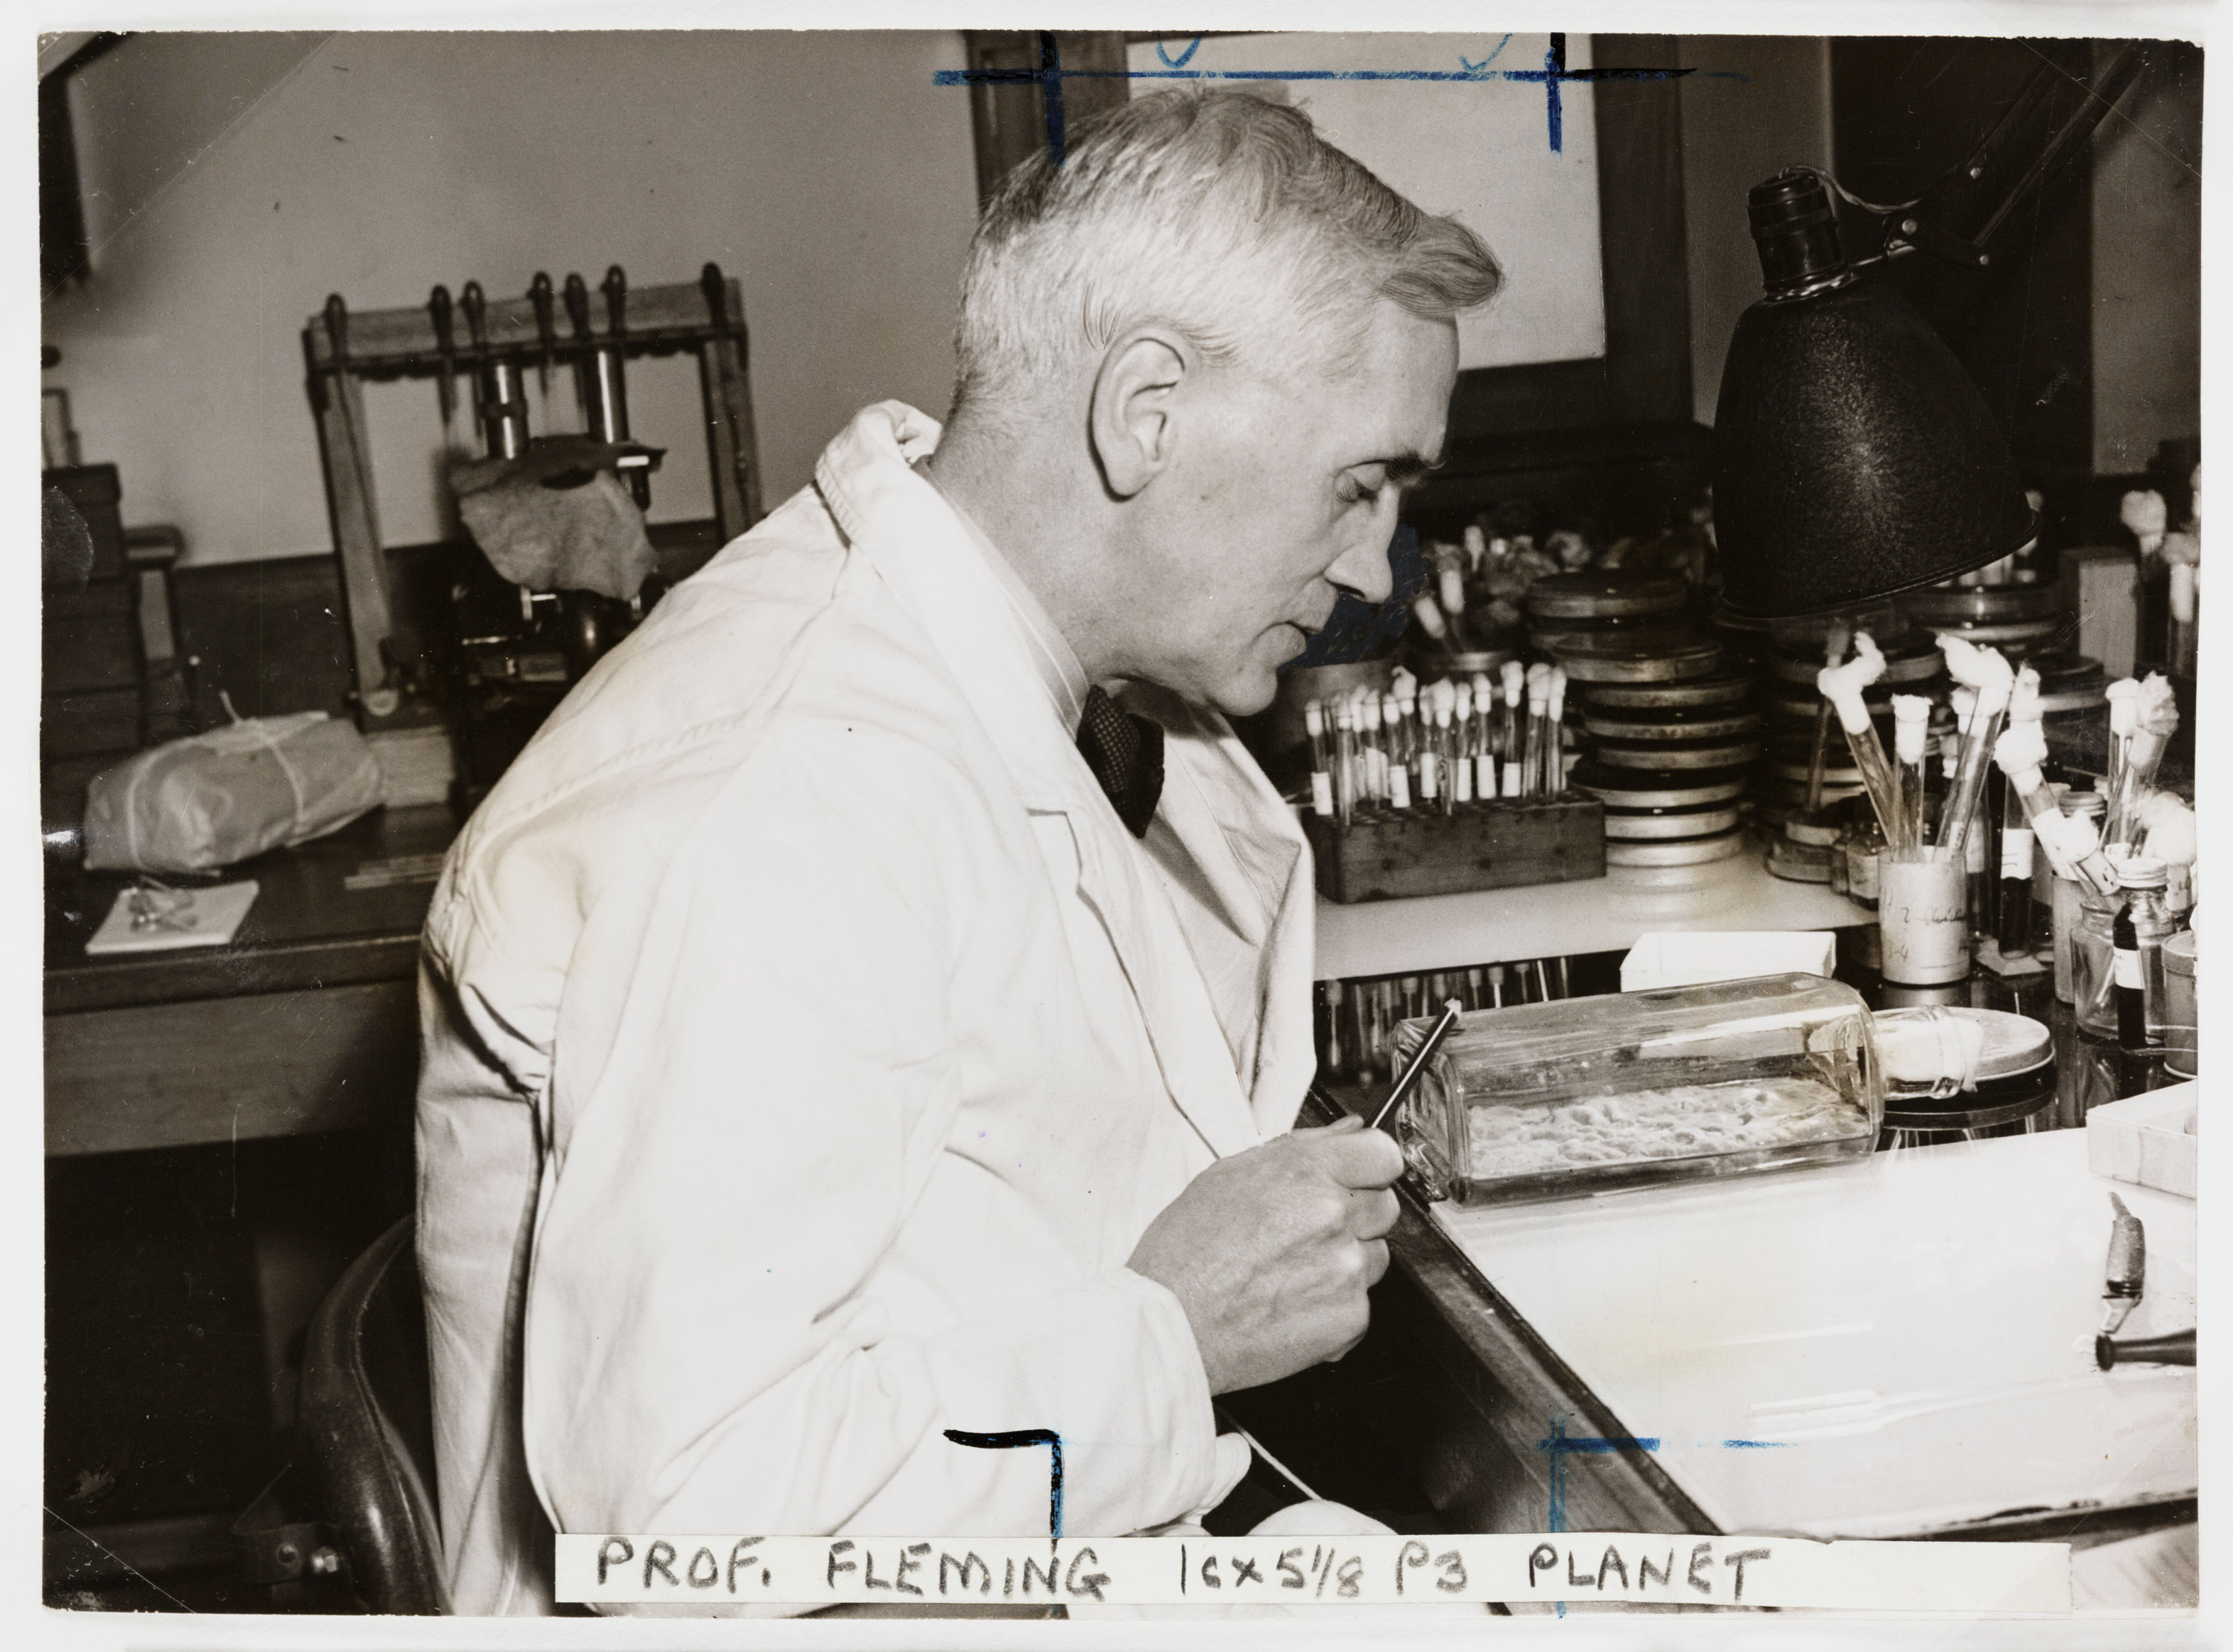 Alexander Fleming discovered the antibiotic penicillin in 1929. Antibiotics were voted as the top invention in the MRC's Centenary Poll. Credit: Science Museum / SSPL